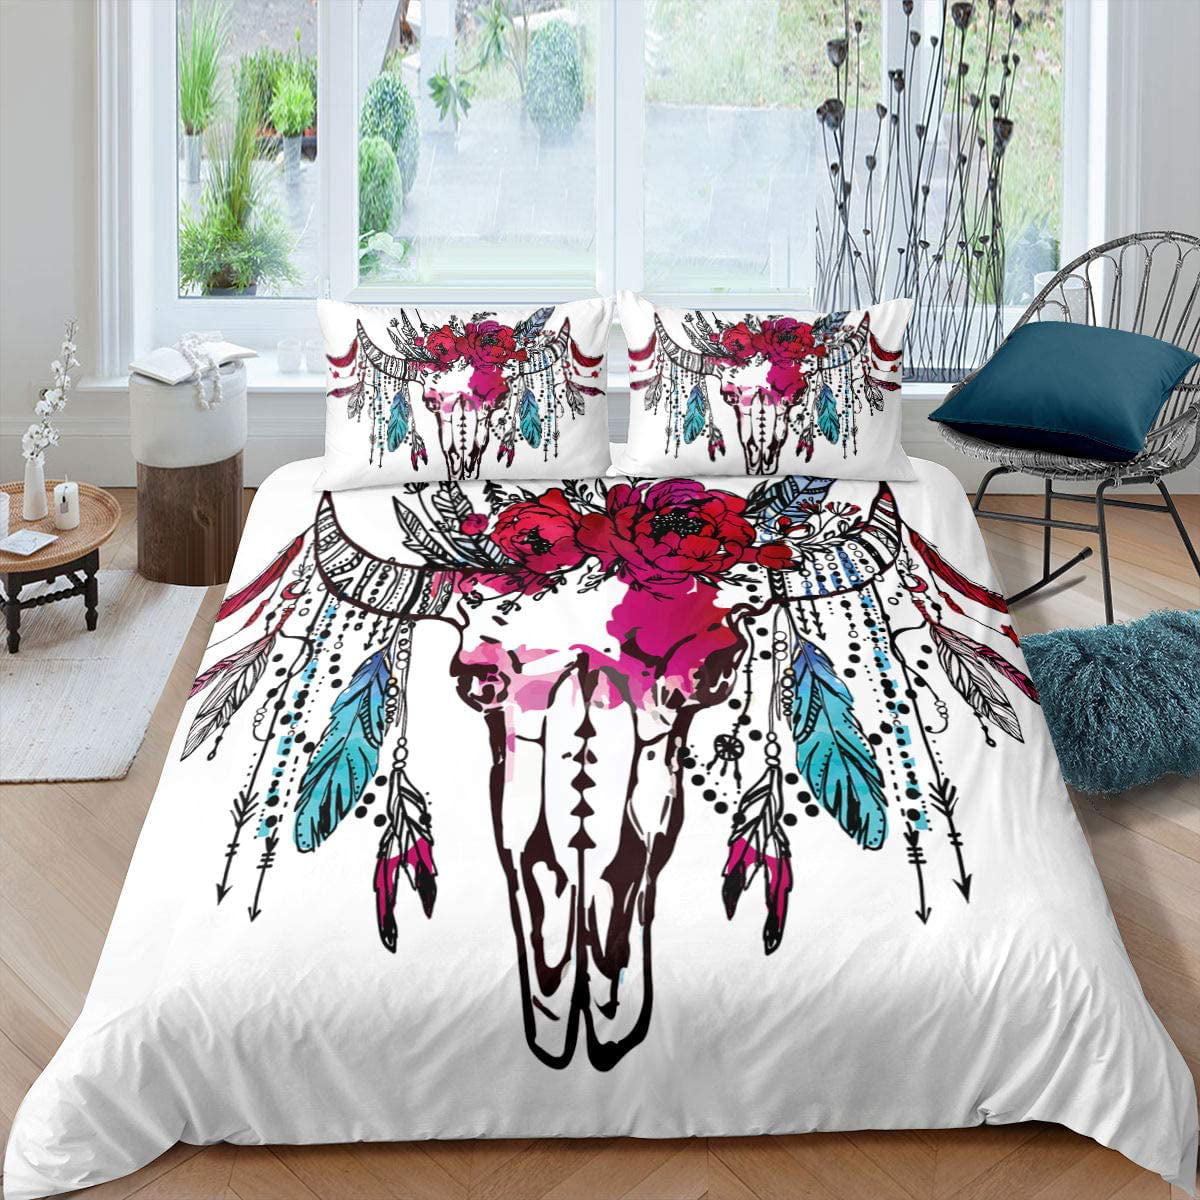 Galaxy Dreamcatcher Bedspread Boho Dream Catcher Coverlet Set Deer Skull Quilted Coverlet for Boys Girls Kids Starry Sky Room Decor Bohemian Colorful Feather Quilted Bedroom Collection Twin Size 